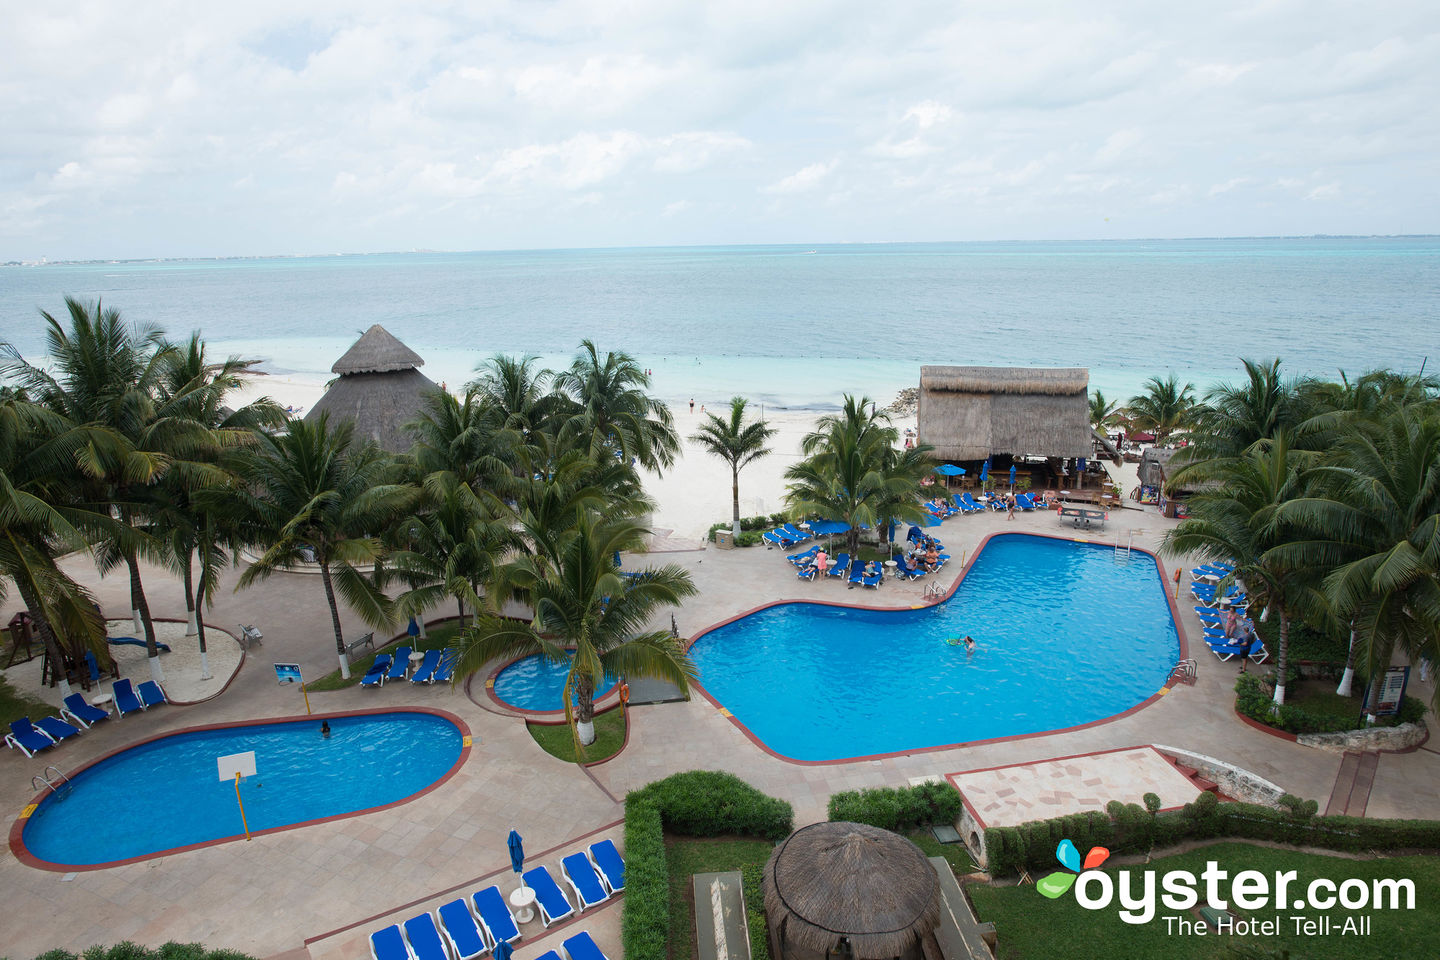 Casa Maya Cancun Review: What To REALLY Expect If You Stay